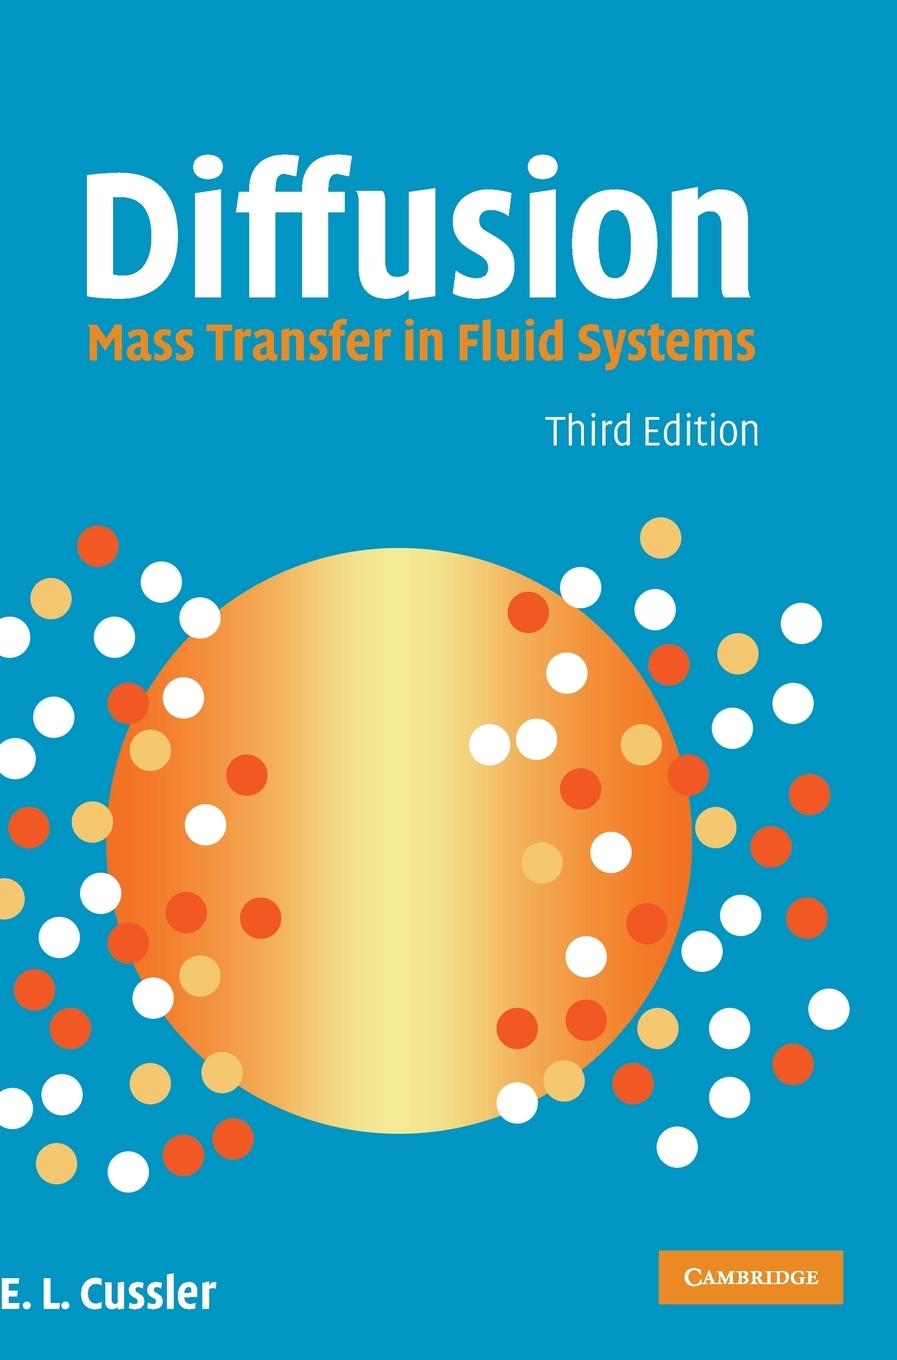 Diffusion: Mass Transfer in Fluid Systems  E. L. Cussler  Buch  Cambridge Chemical Engineering  Englisch  2011 - Cussler, E. L.